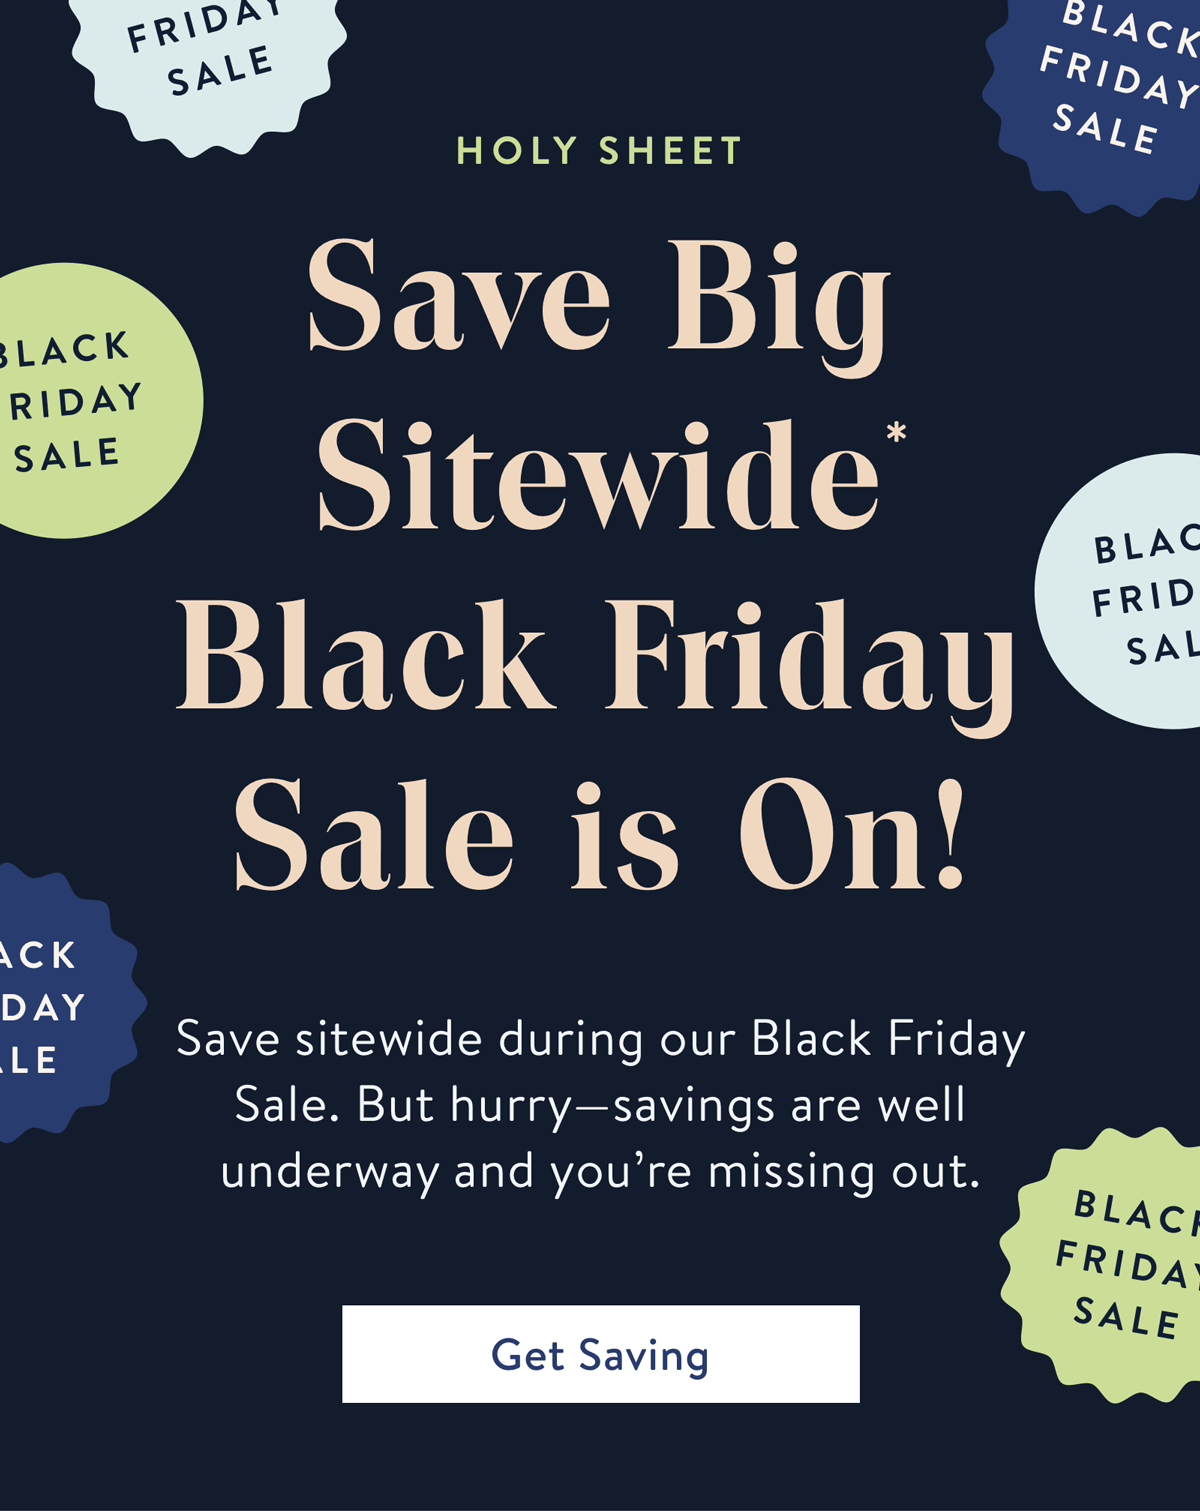 Save 20% Sitewide as our Black Friday Sale is On!